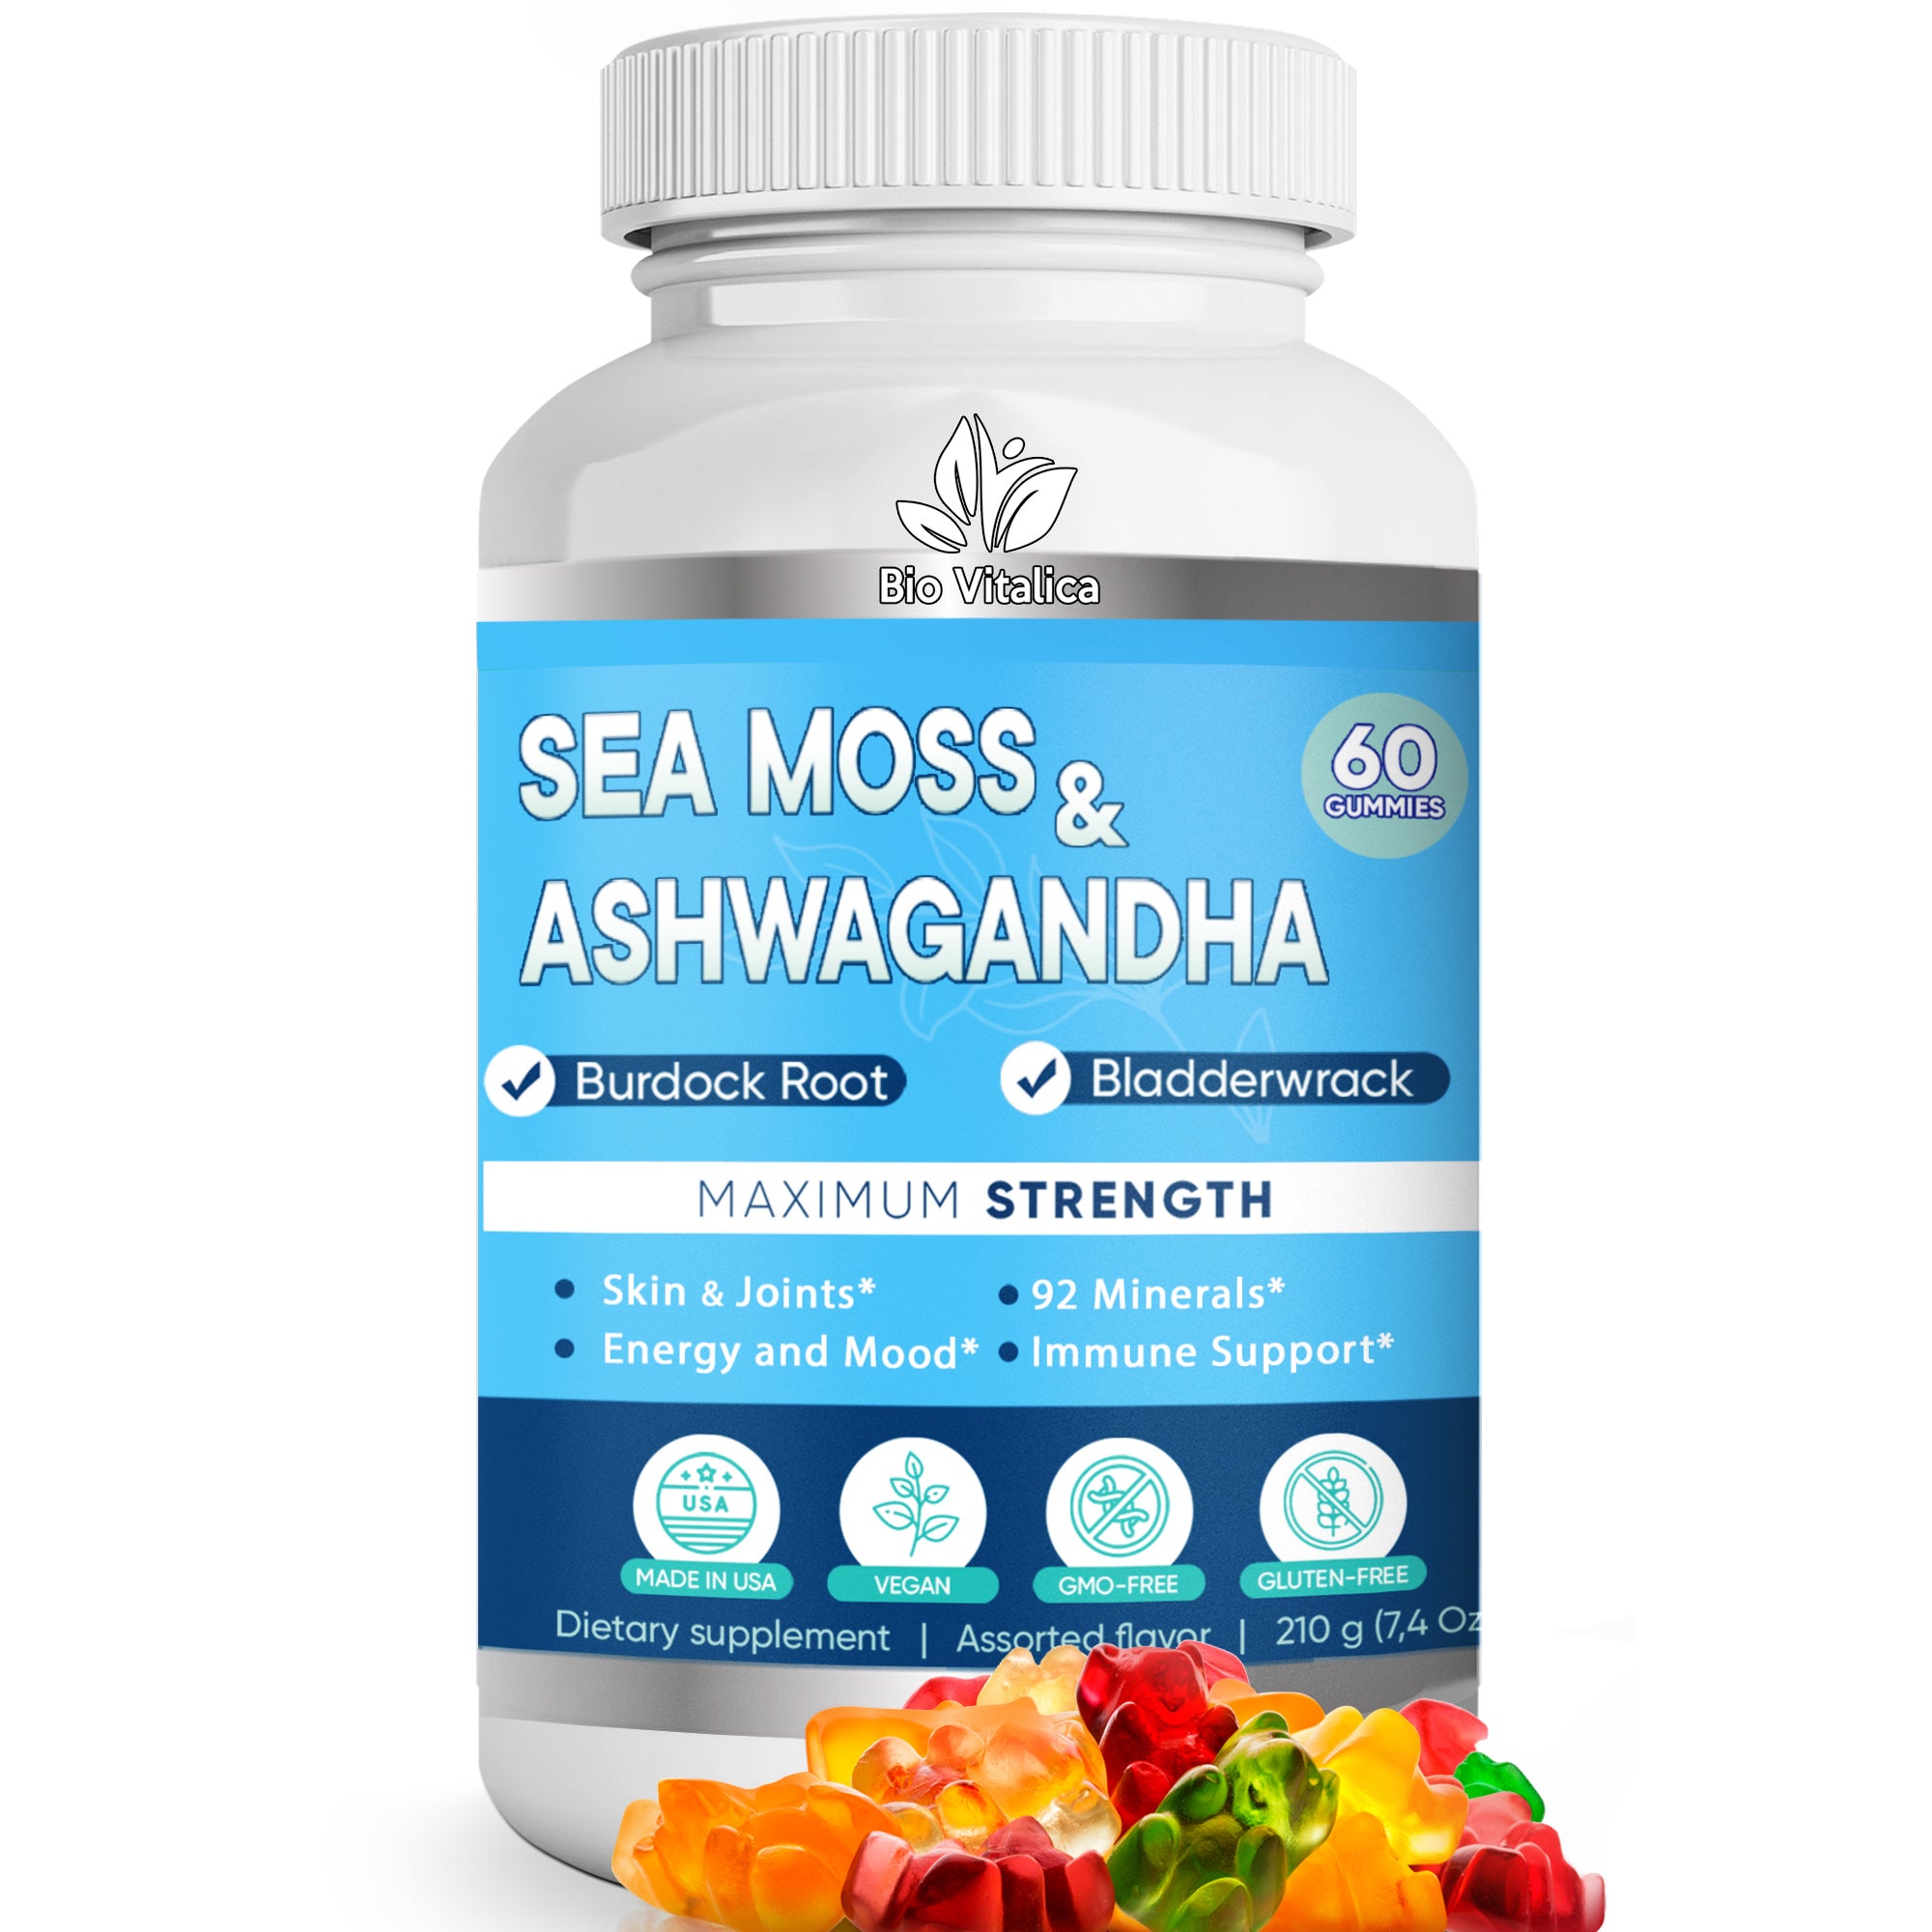 Sea Moss Products